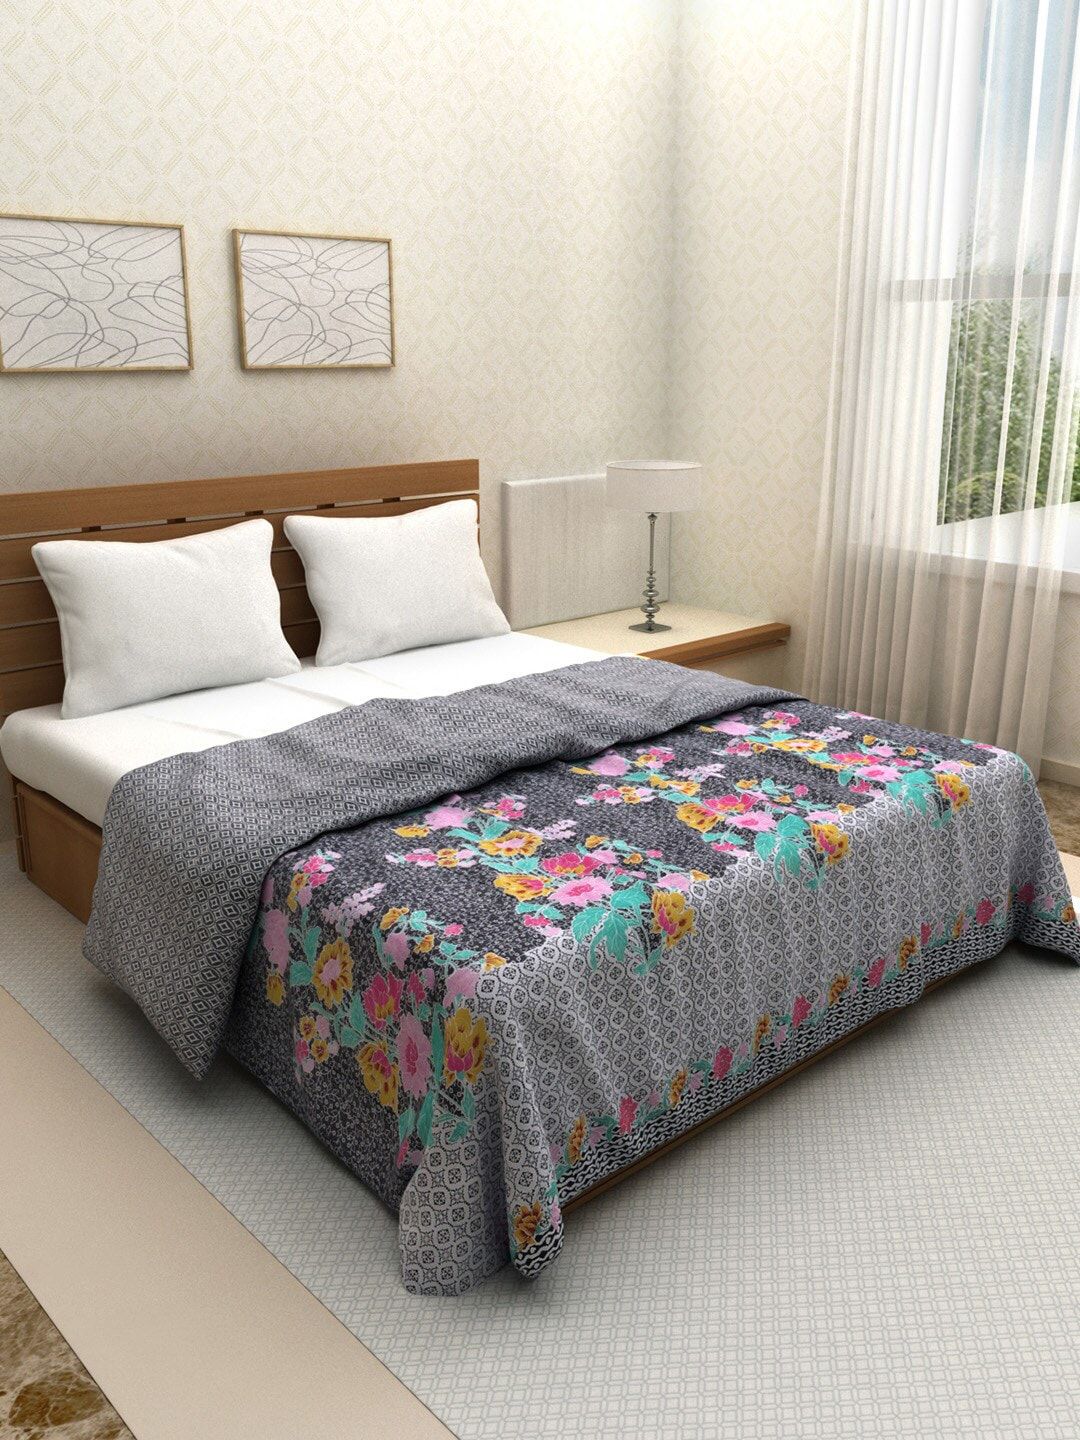 ROMEE Black & White Floral AC Room 210 GSM Double Bed Comforter Price in India